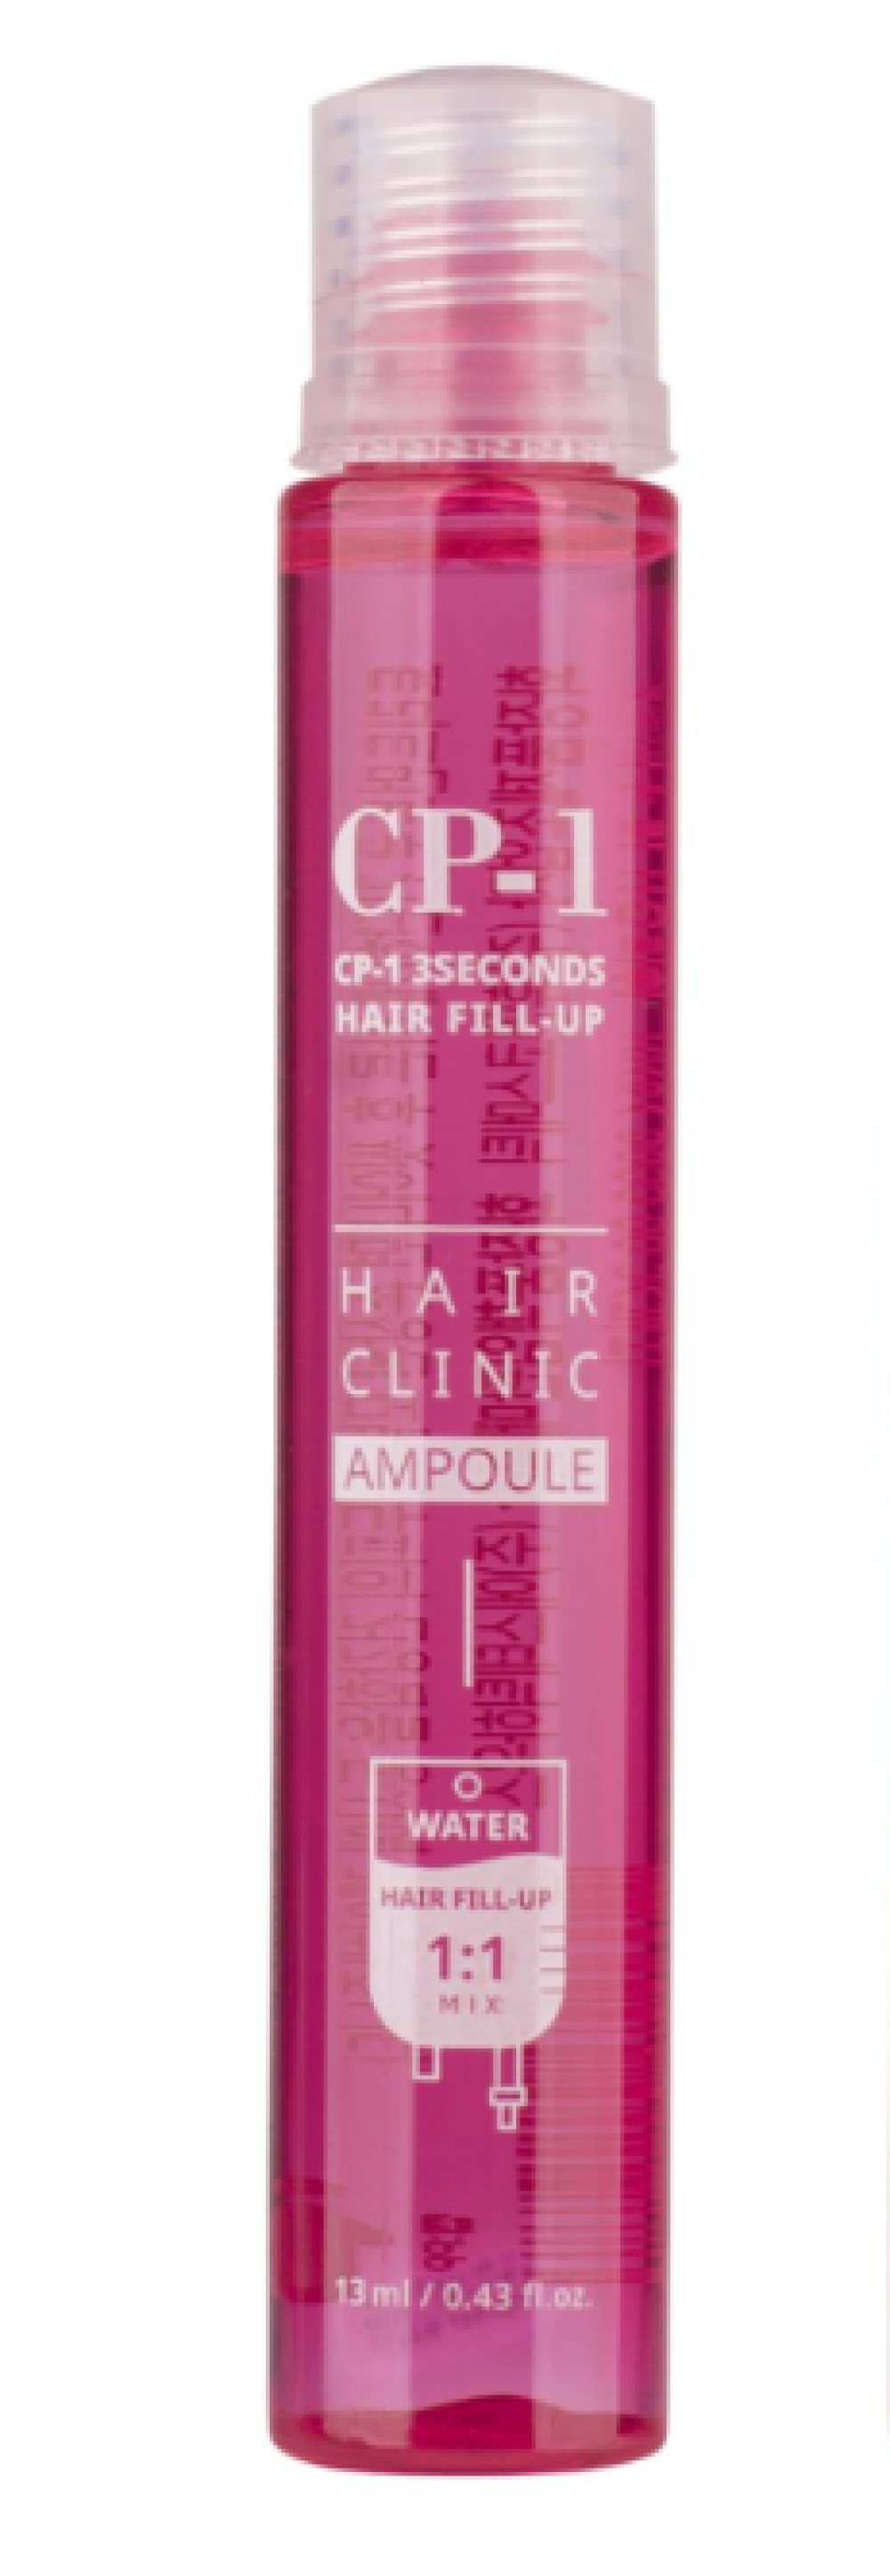 Филлер для волос Esthetic House CP-1 3 Seconds Hair Ringer Hair Fill-up Ampoule, 13 мл